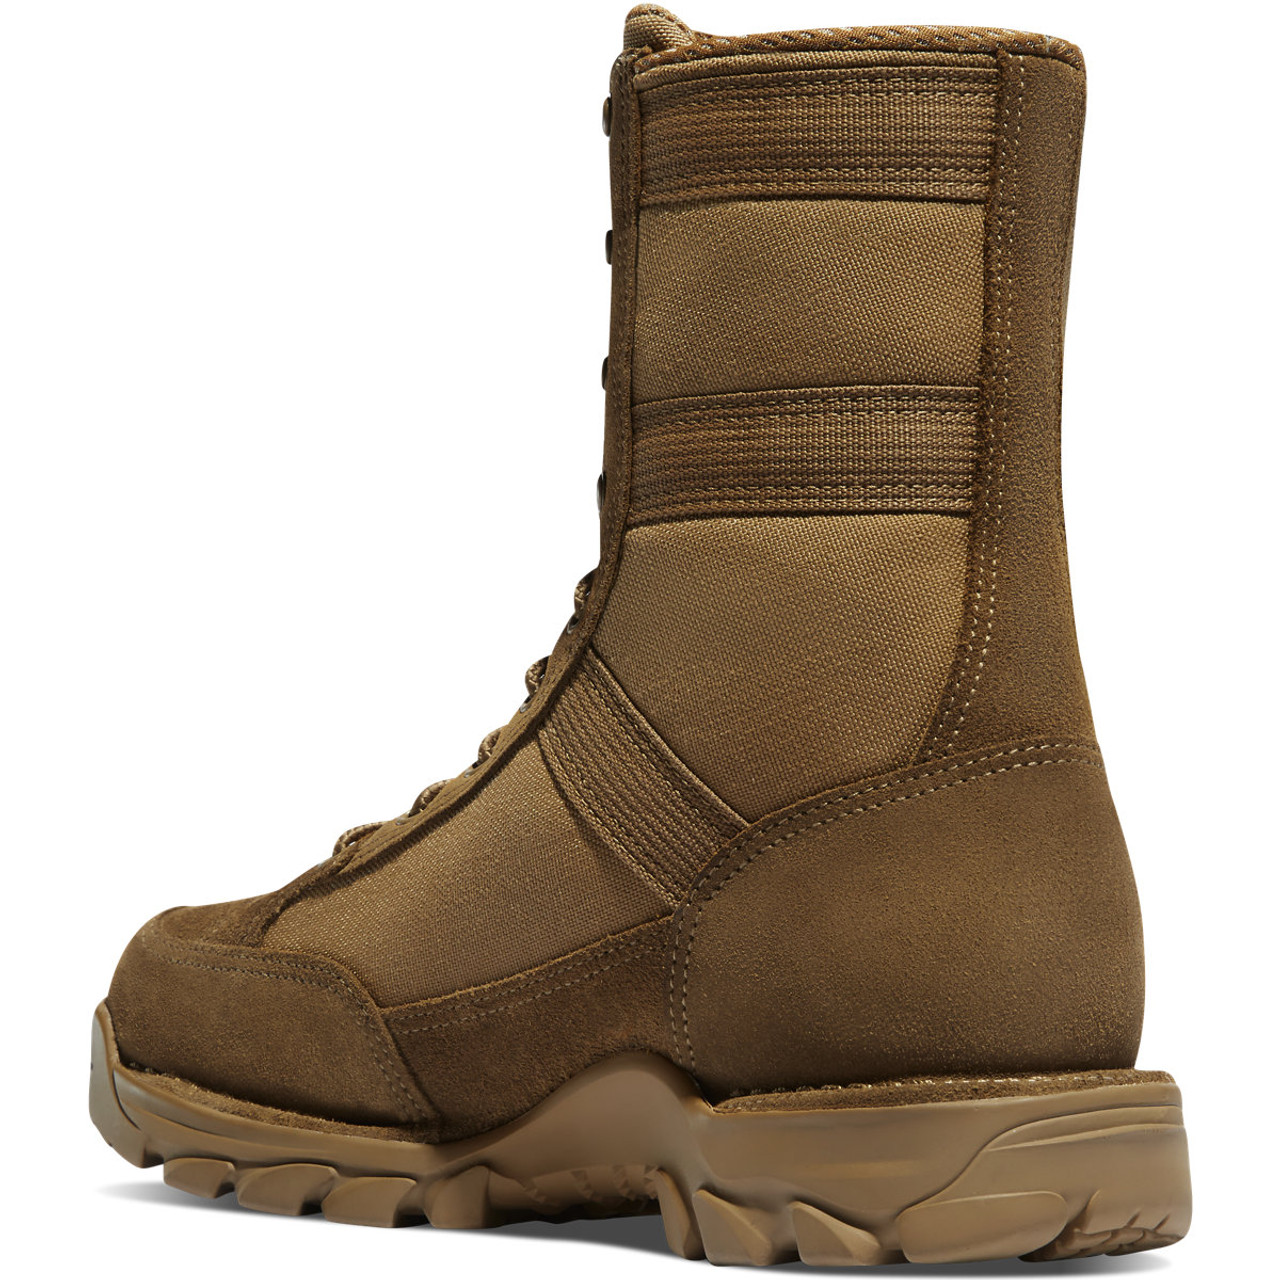 DANNER® WOMEN'S RIVOT TFX COYOTE INSULATED 400G TACTICAL BOOTS 51516